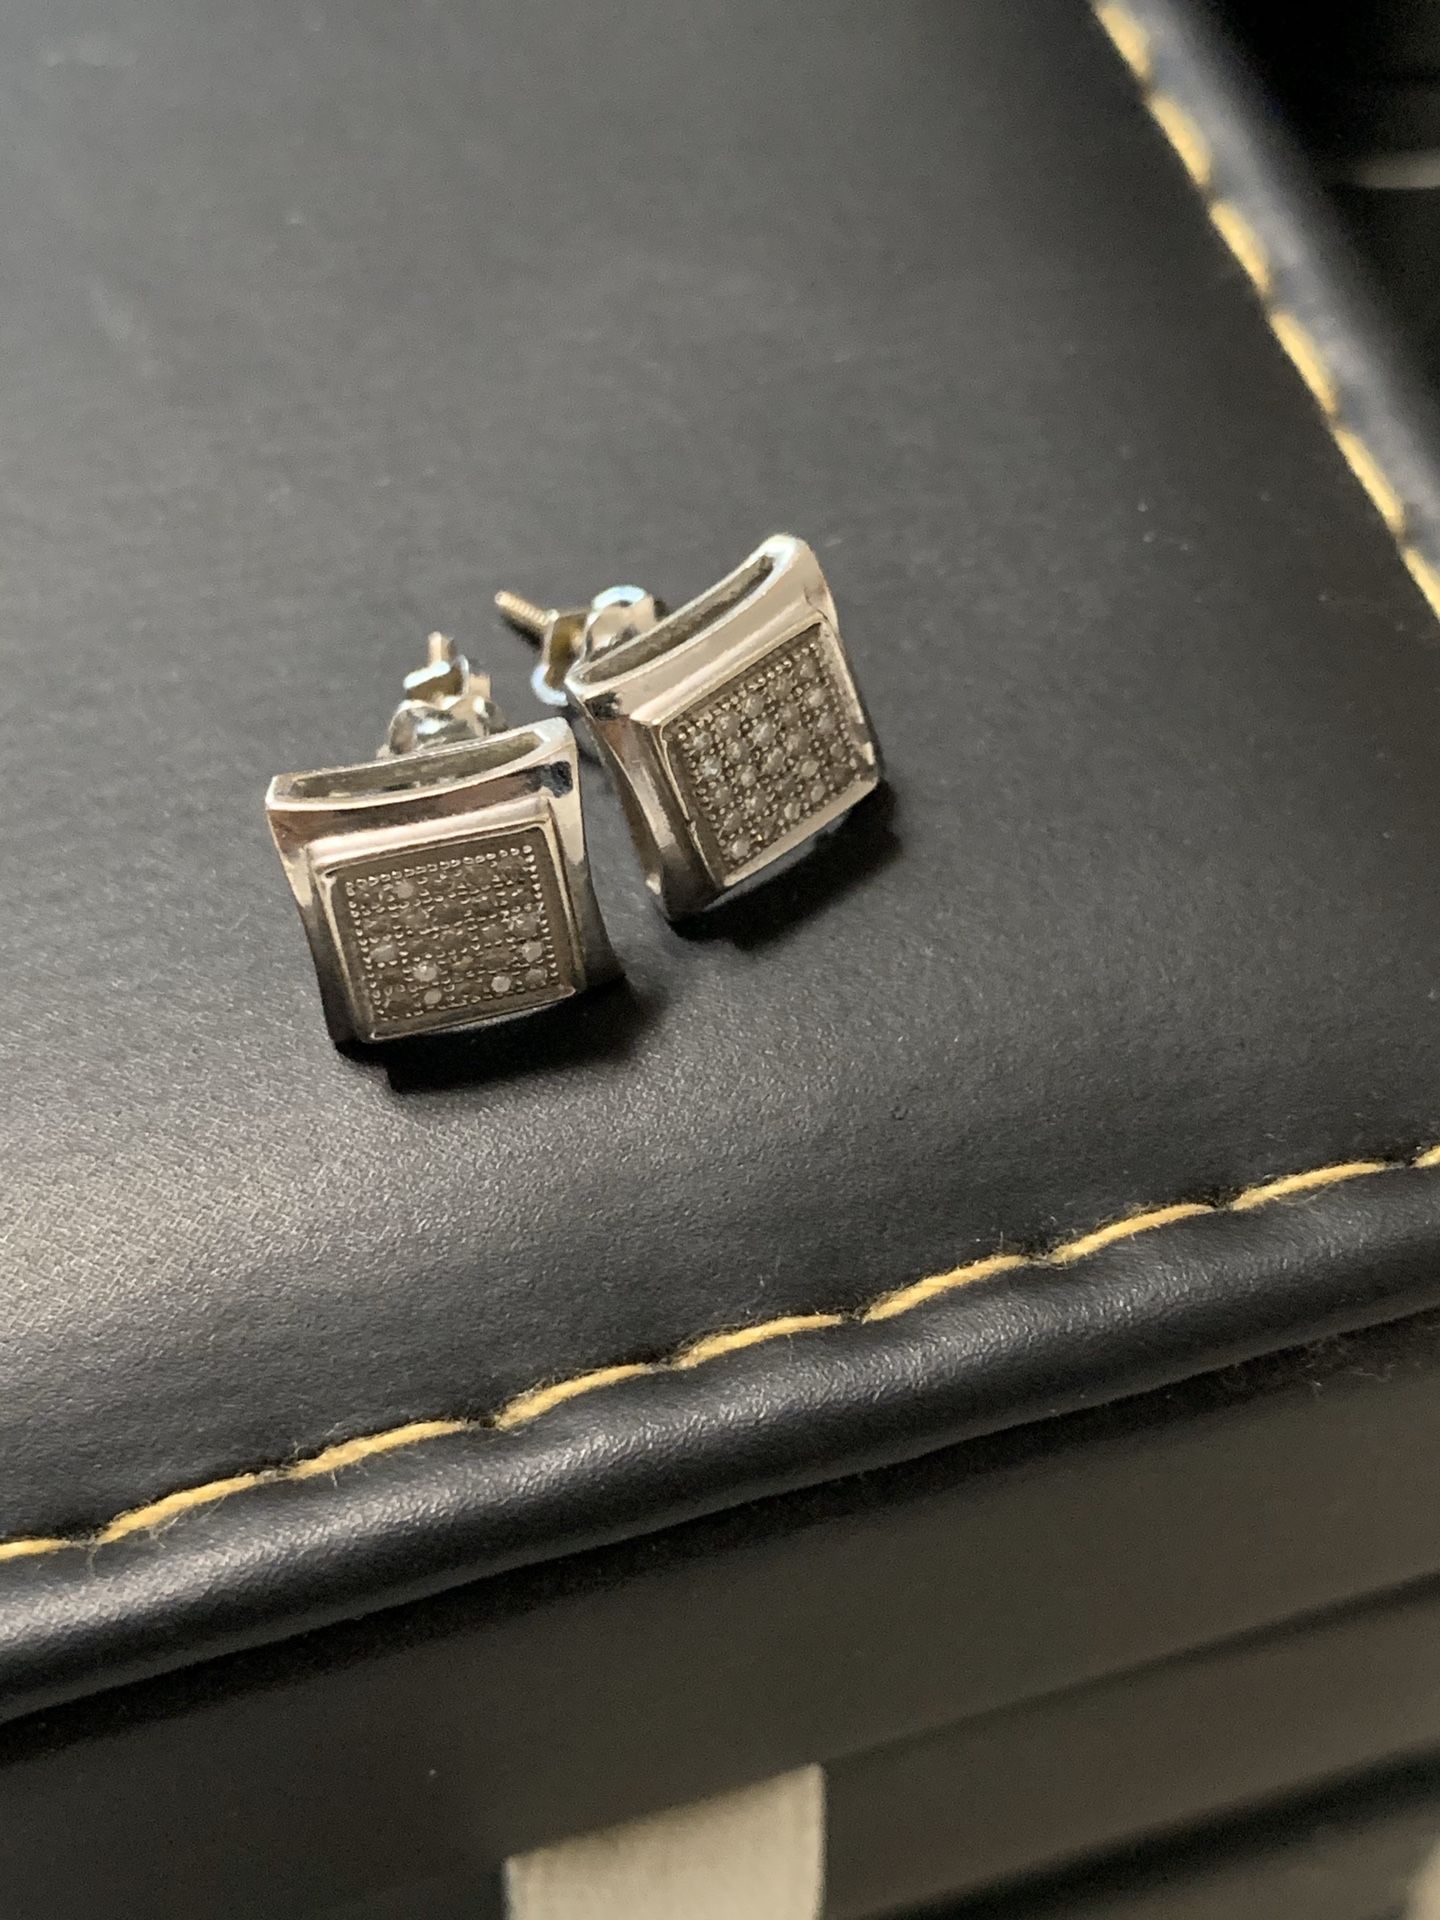 Diamond Earrings Hip Hop Style Sterling Silver and Real Diamonds. Worth over $400 Screw Backs